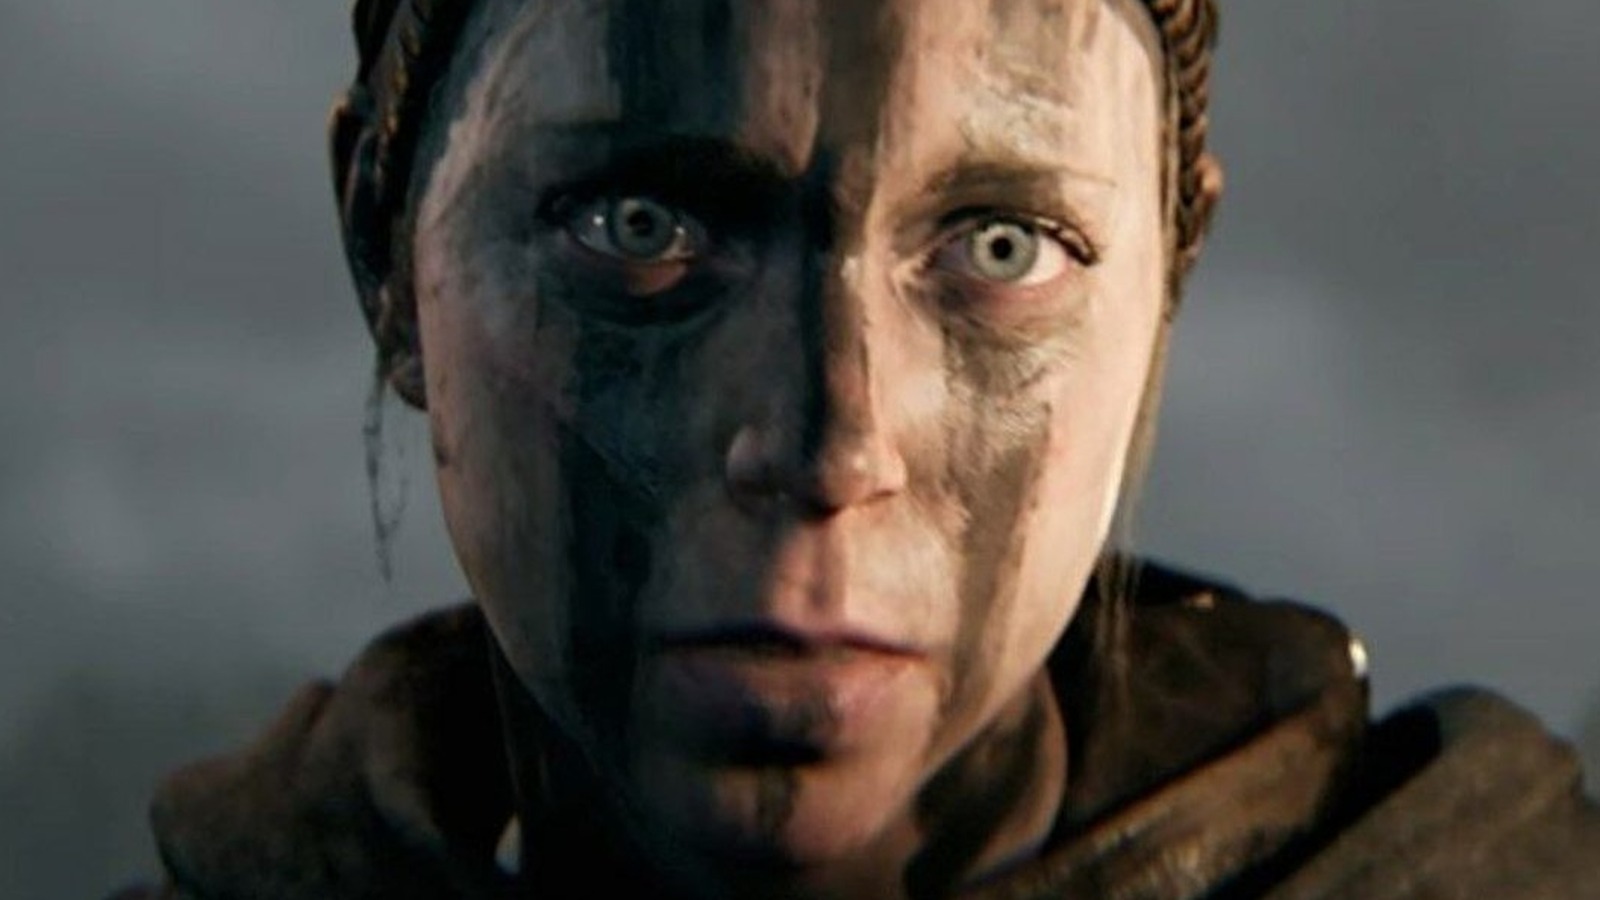 Hellblade 2 is the first confirmed Xbox Series X game using Unreal Engine 5